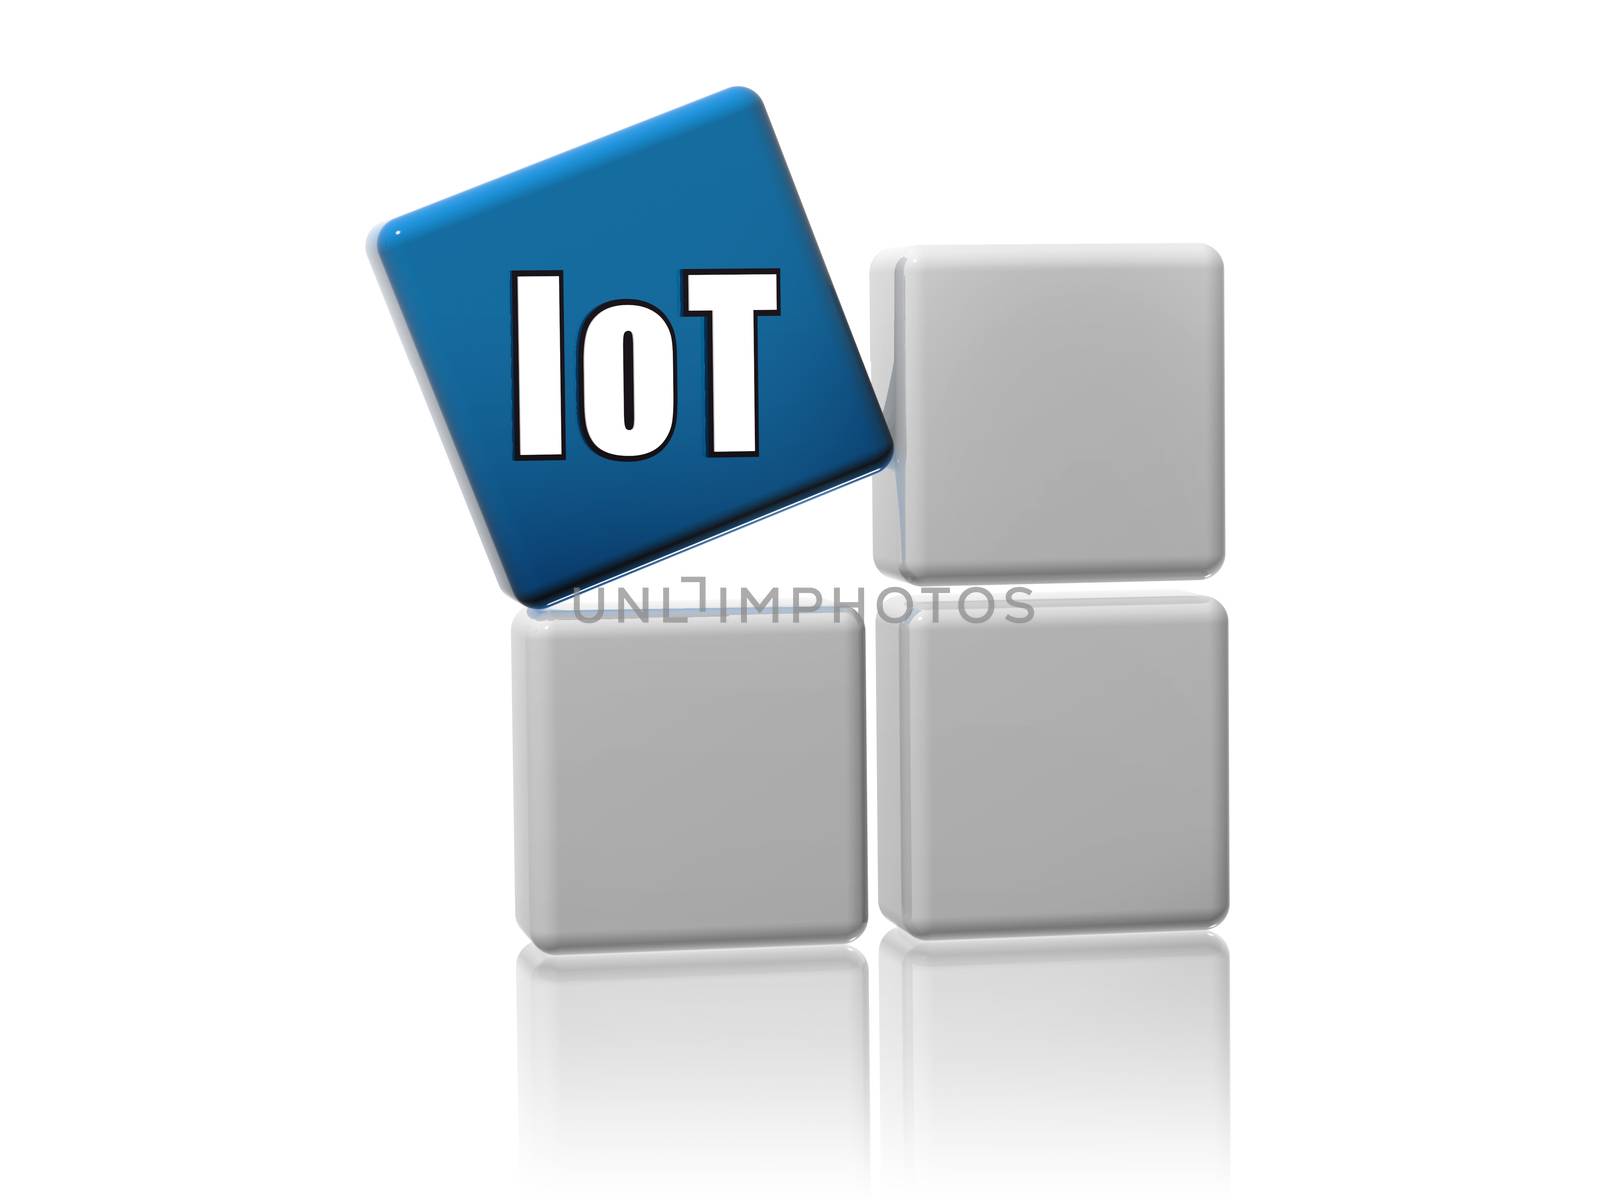 iot sign, internet of things - 3d blue cube with white letters on grey boxes, remote control in network, high technologies concept